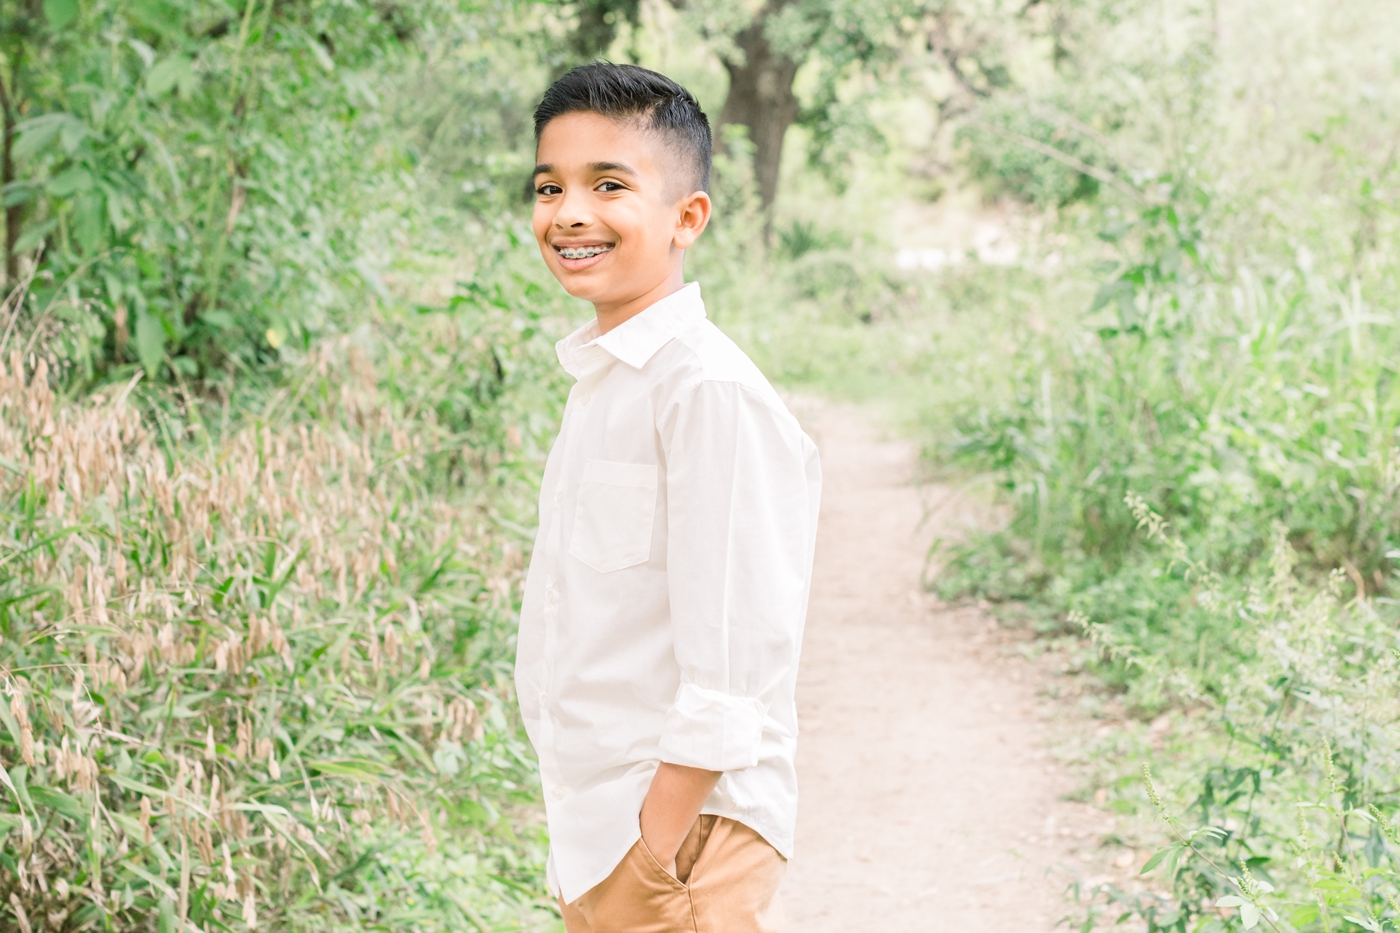 Child smiling at camera with his hands in his pockets in beautiful field. Photo by Austin family photographer, Sana Ahmed Photography.